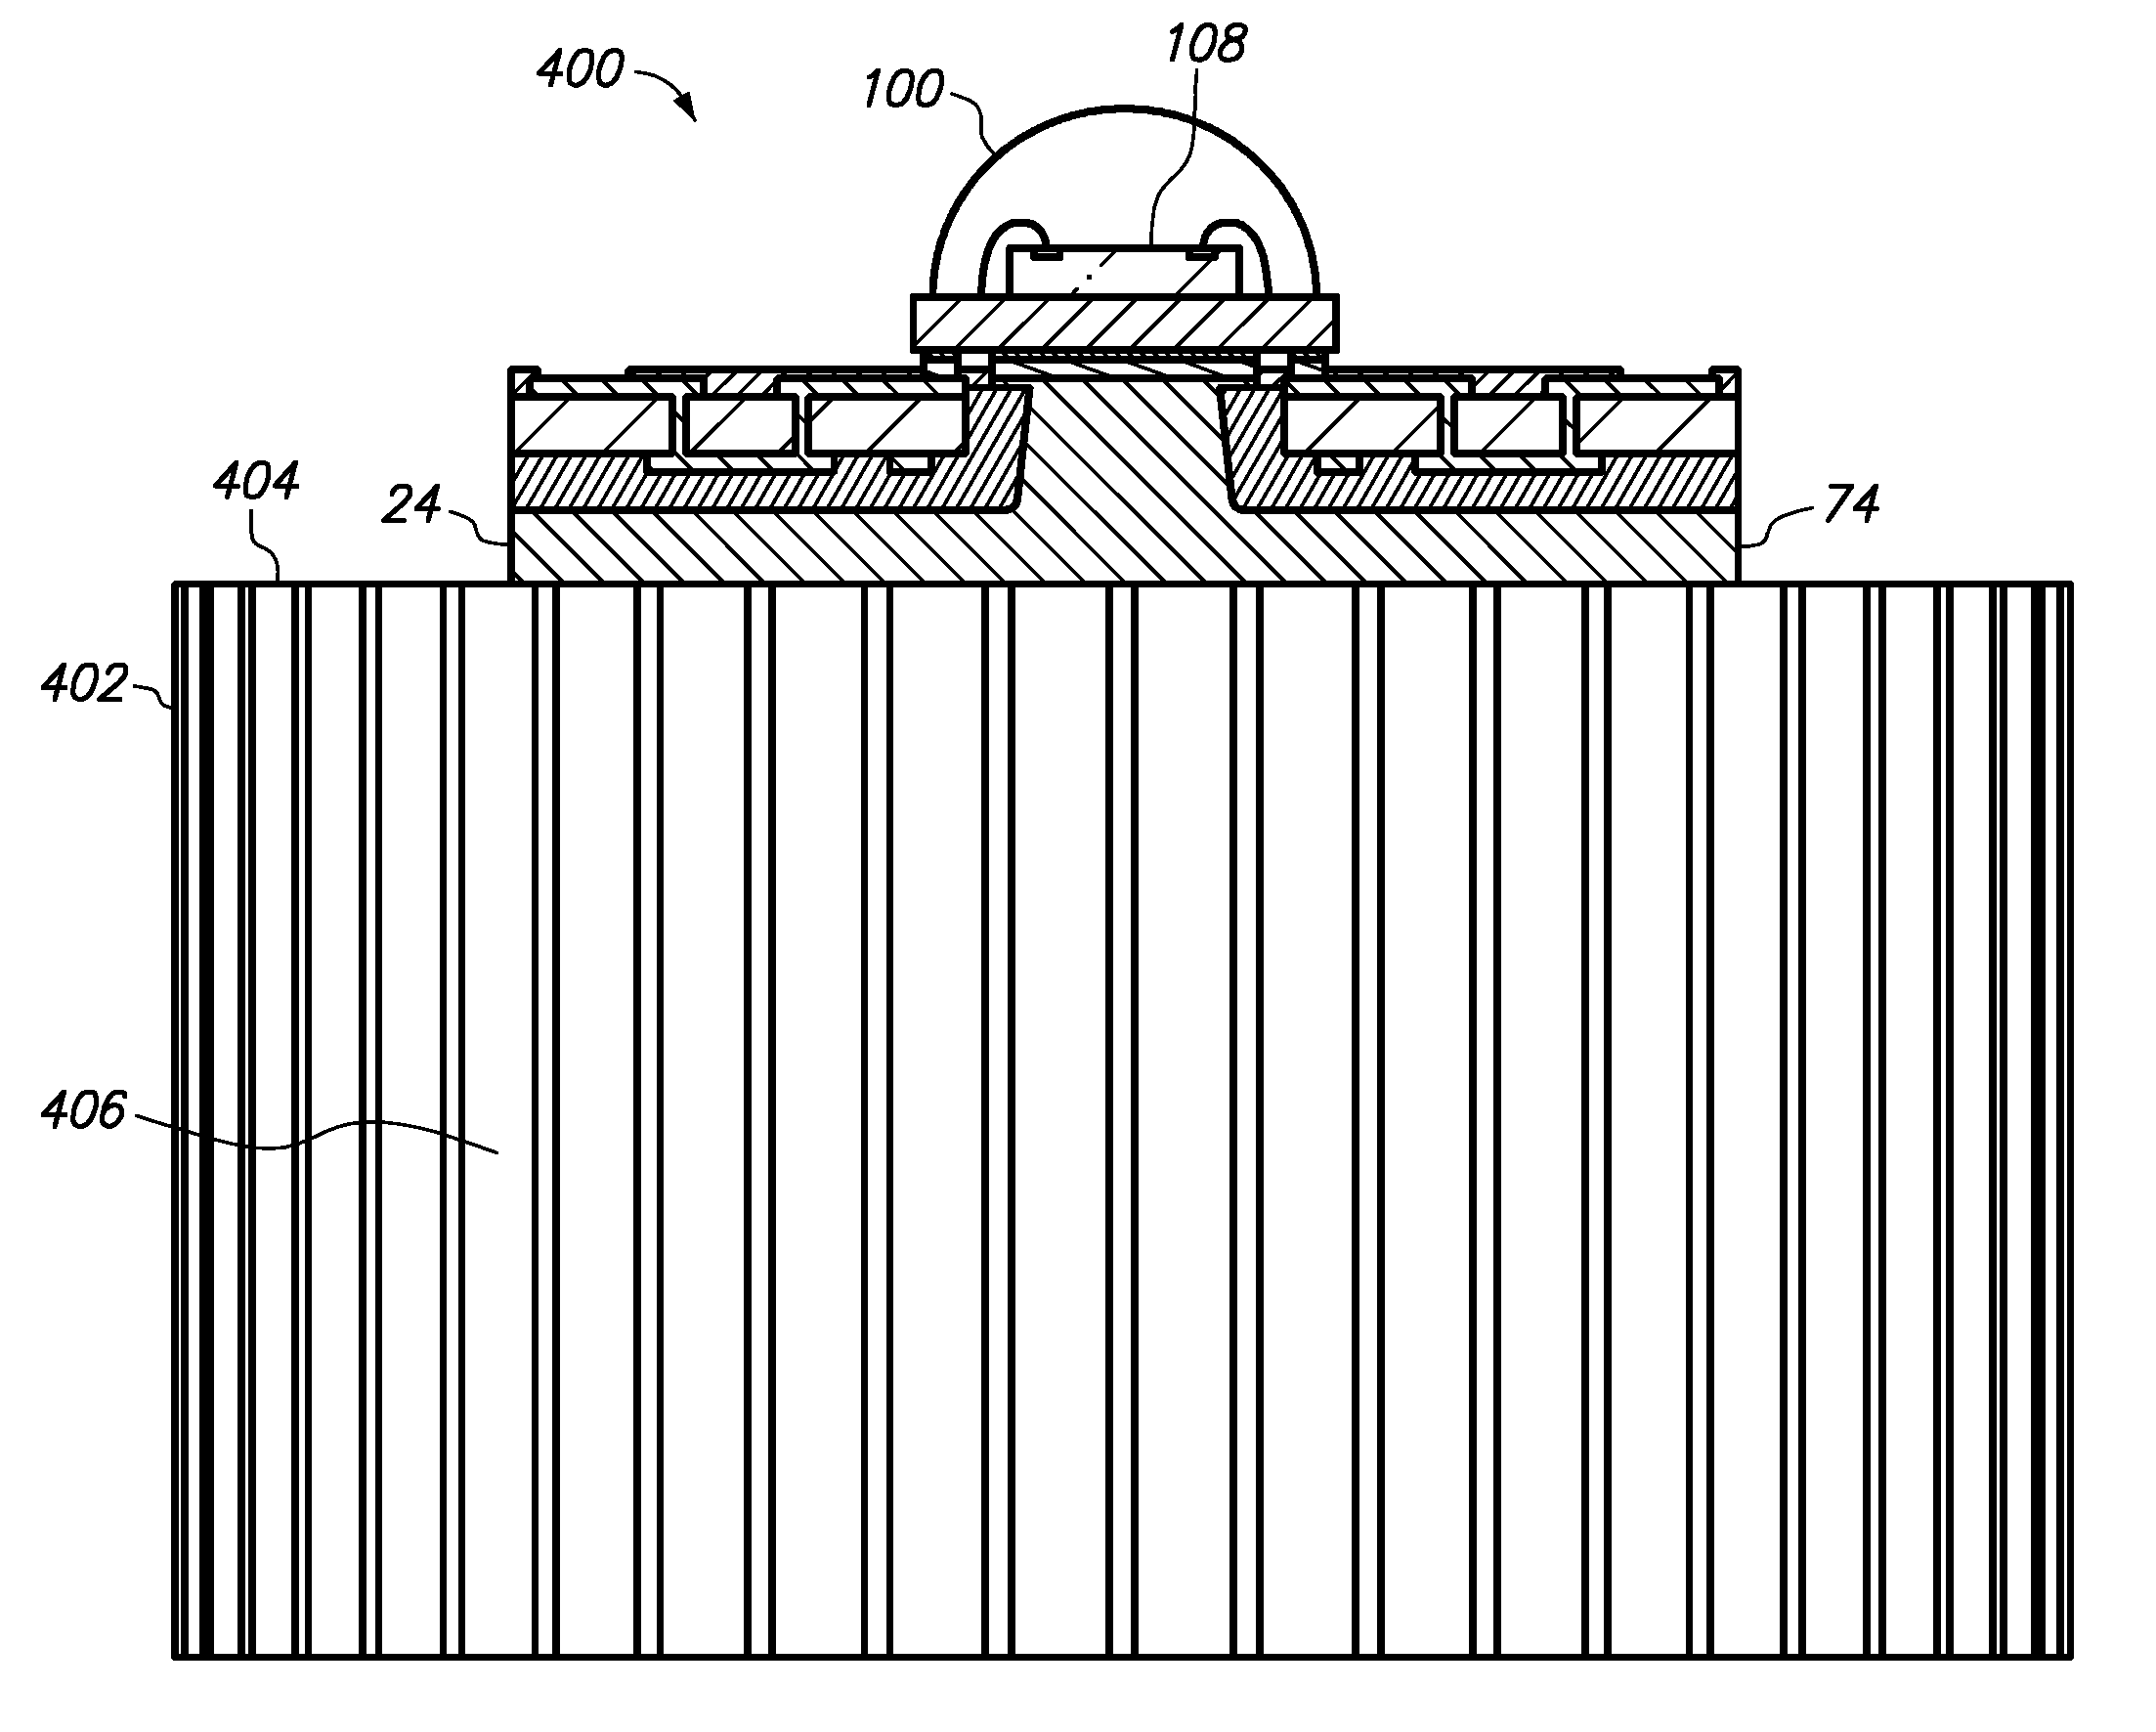 Method of making a semiconductor chip assembly with a post/base heat spreader and horizontal signal routing